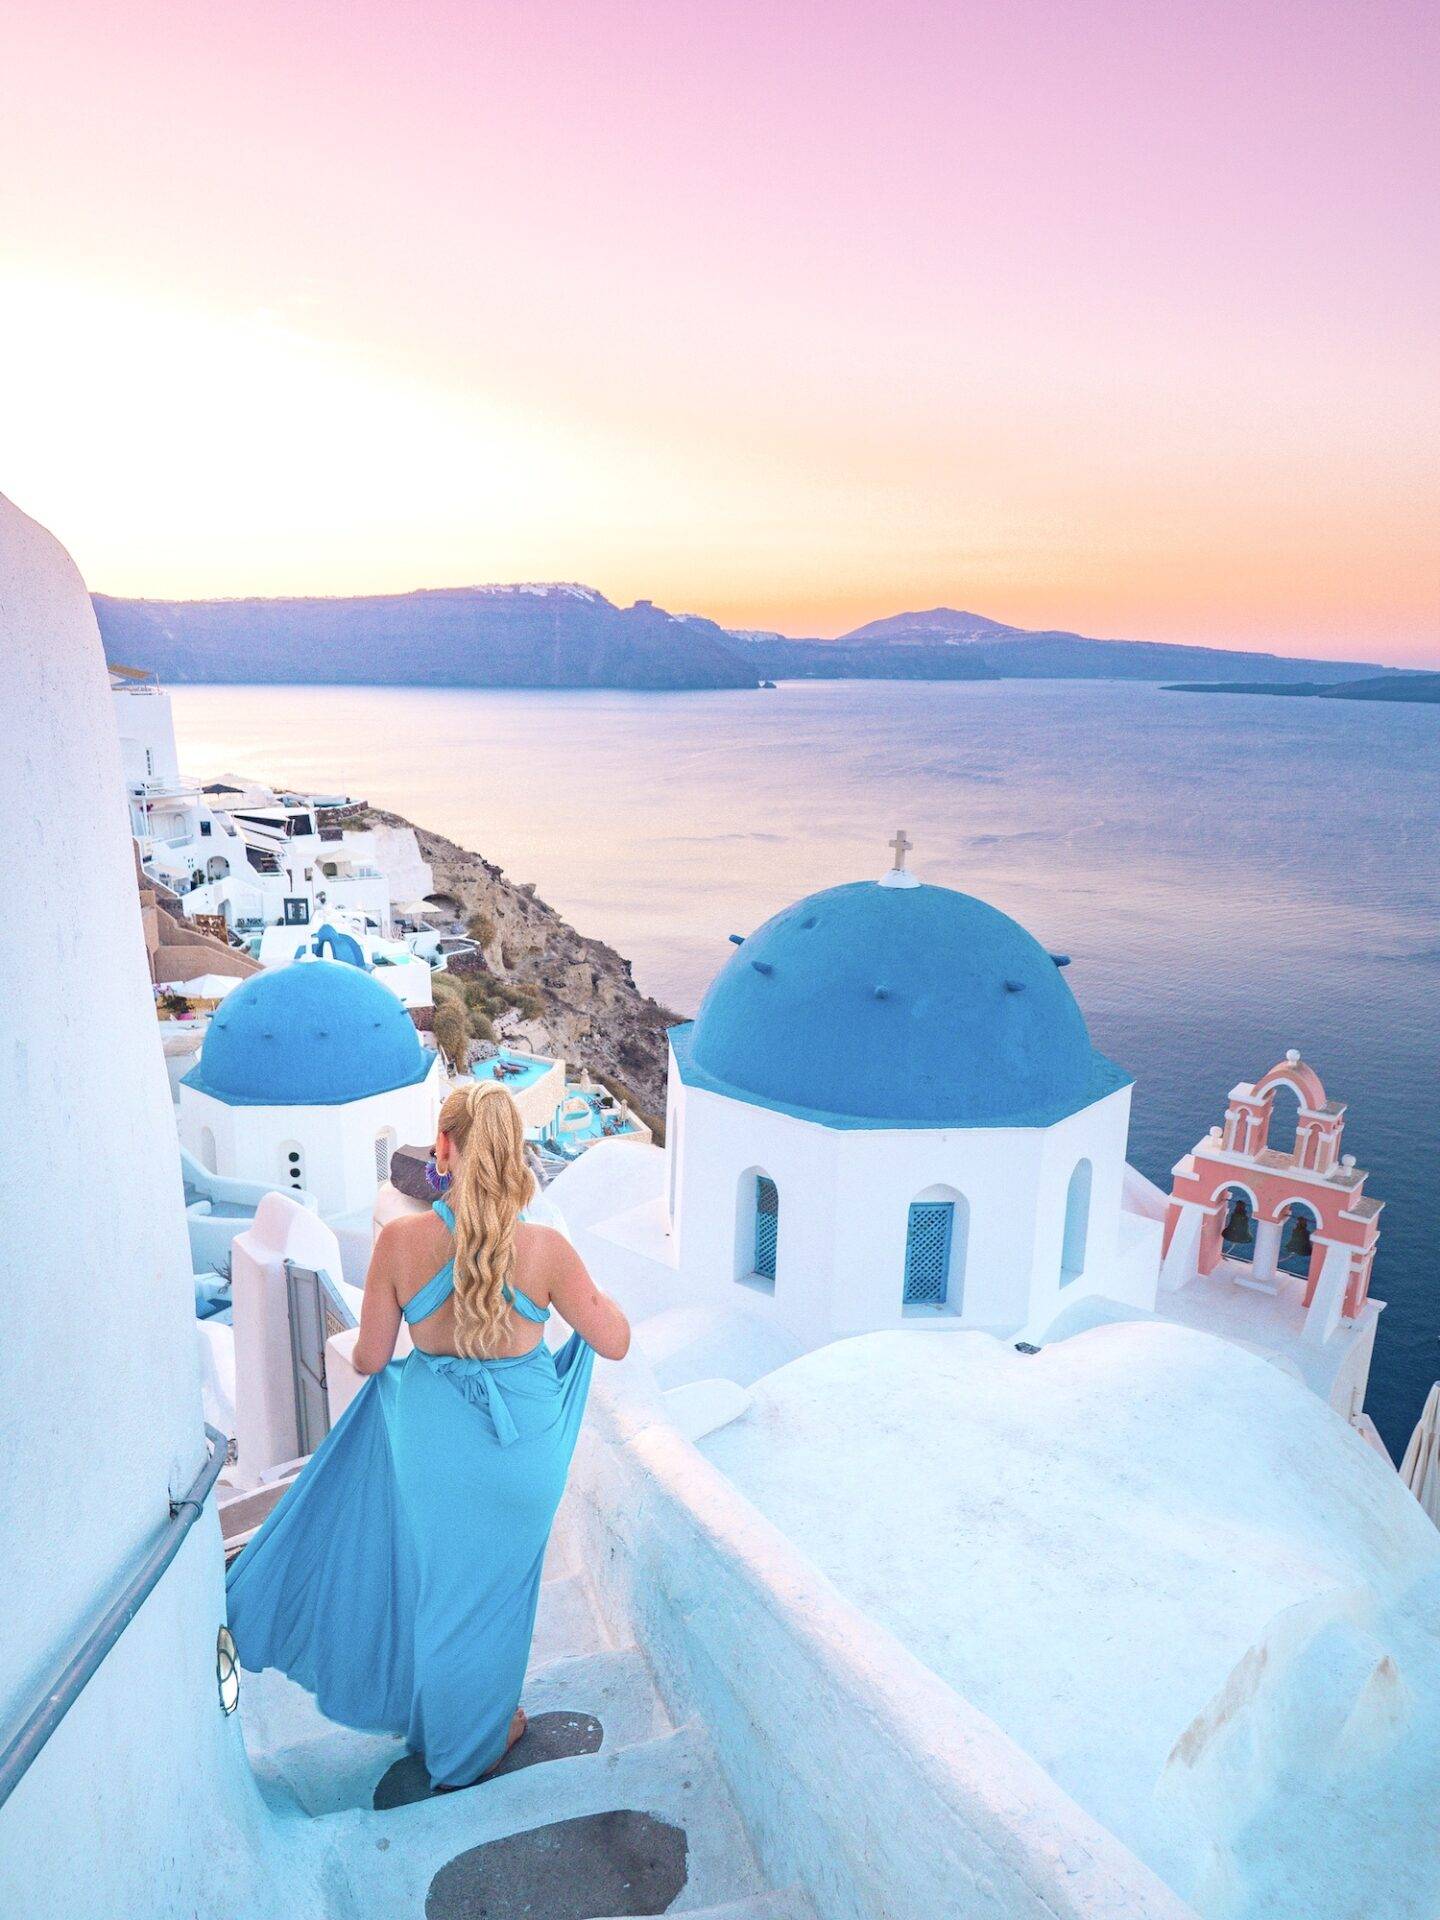 The best photo spots and most instagrammable places in Santorini: The famous blue domes of Oia. Click the photo to see the rest of my list of the best instagram photo spots in Santorini!